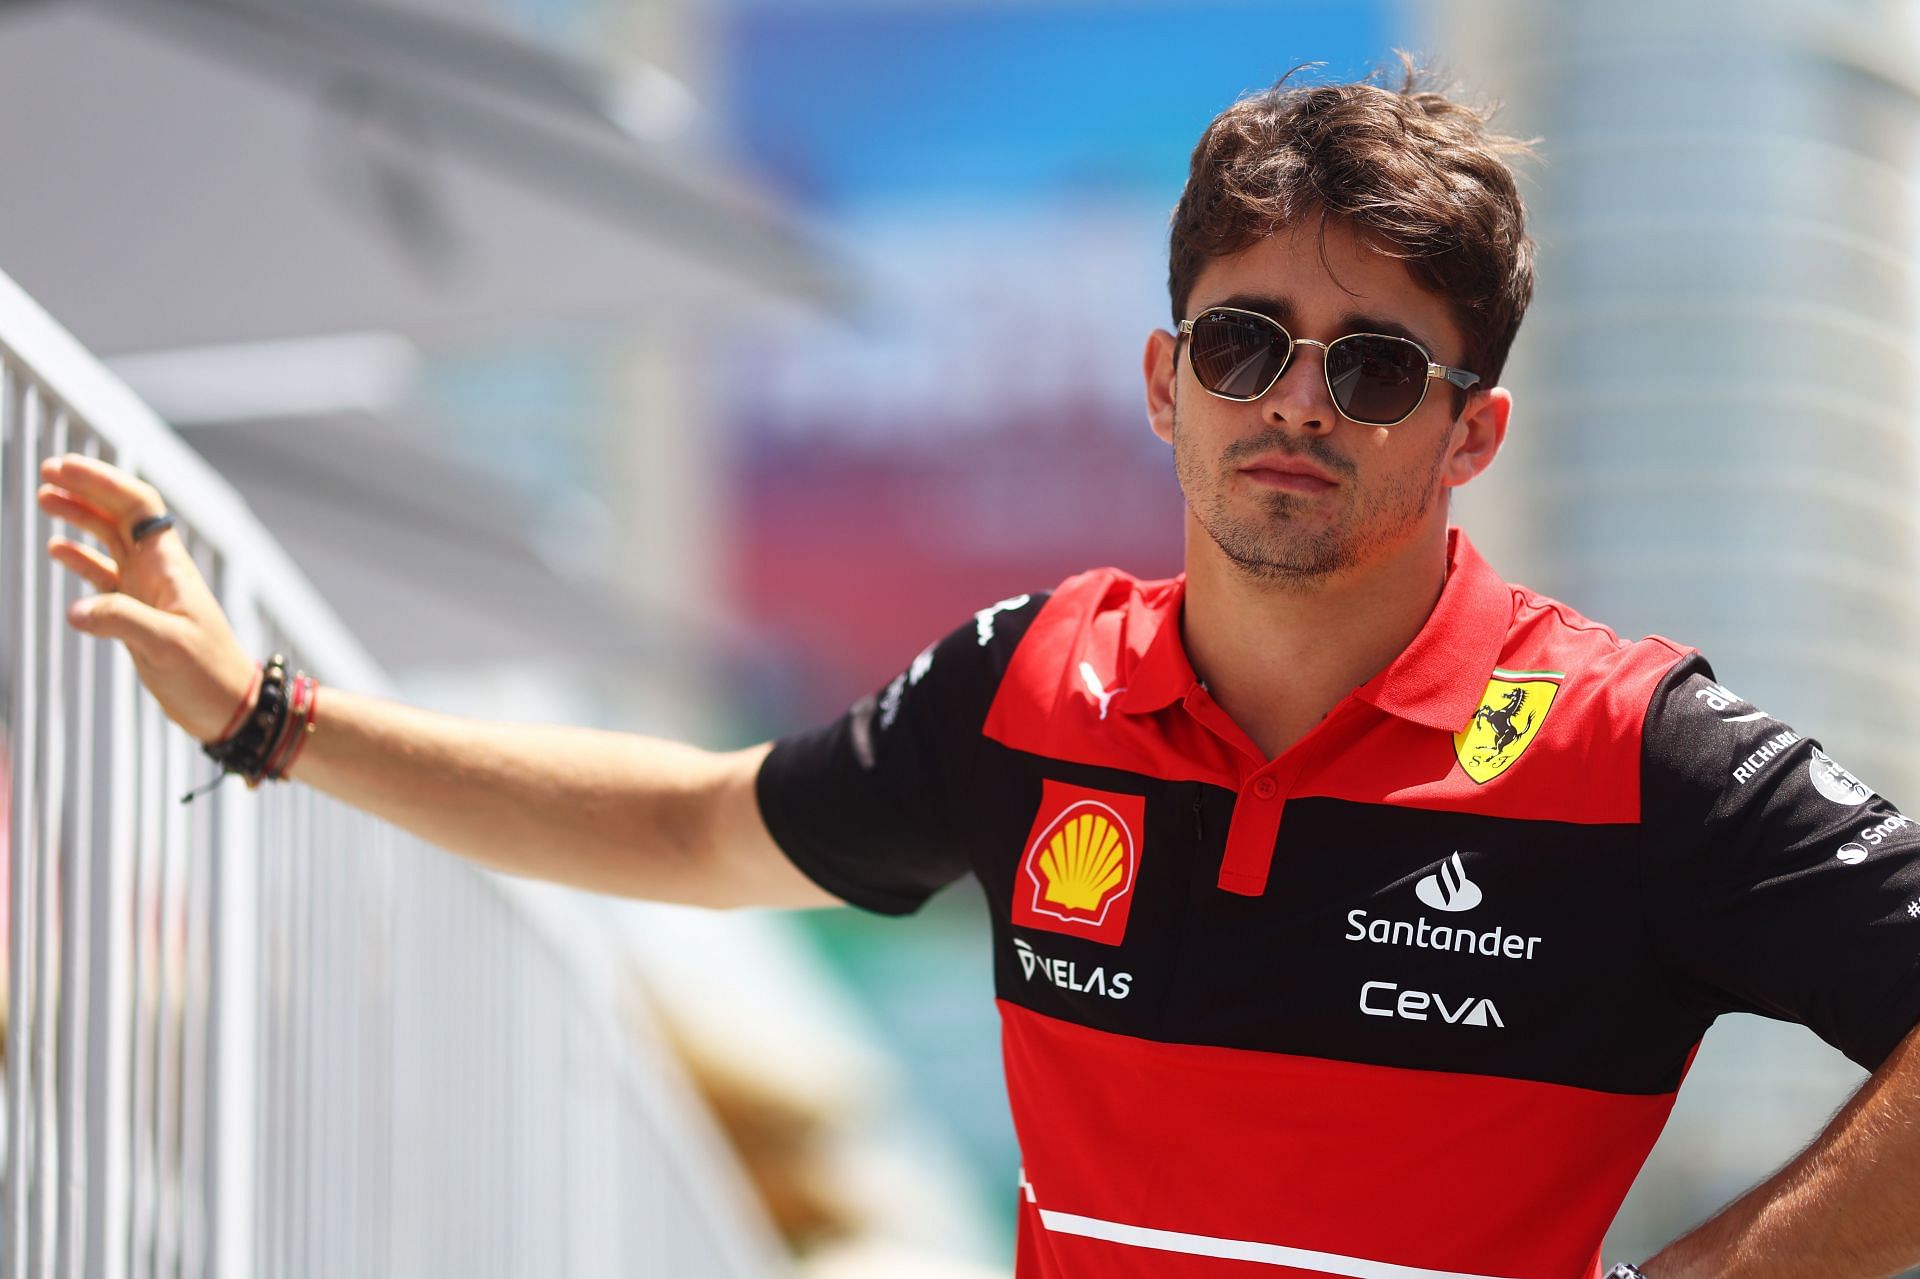 Ferrari driver Charles Leclerc photographed in the paddock during the previews for the 2022 F1 Azerbaijan GP (Photo by Clive Rose/Getty Images)